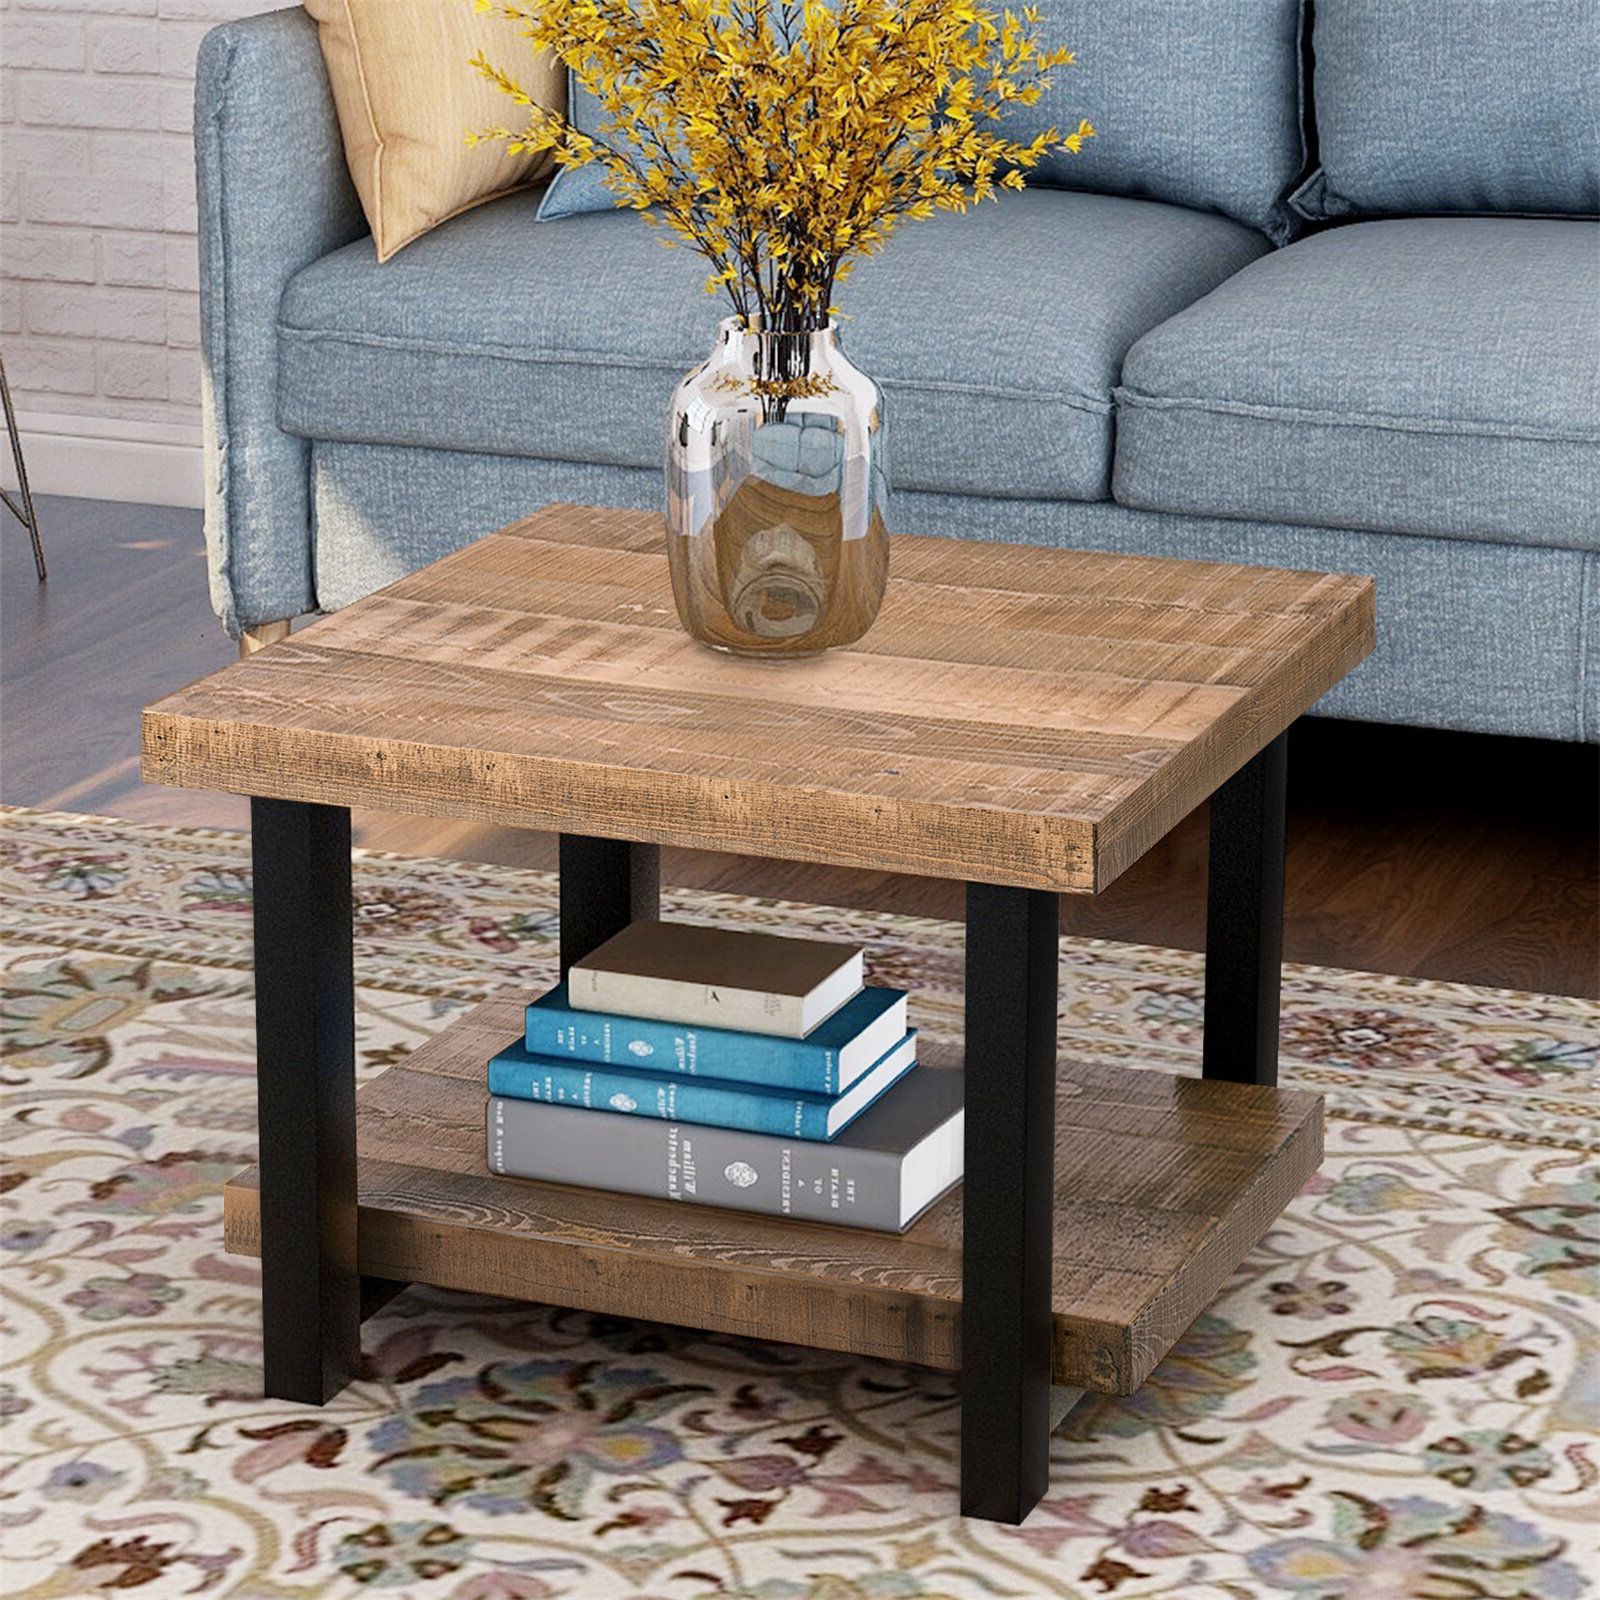 Wayfair Regarding Well Liked Rustic Natural Coffee Tables (View 10 of 20)